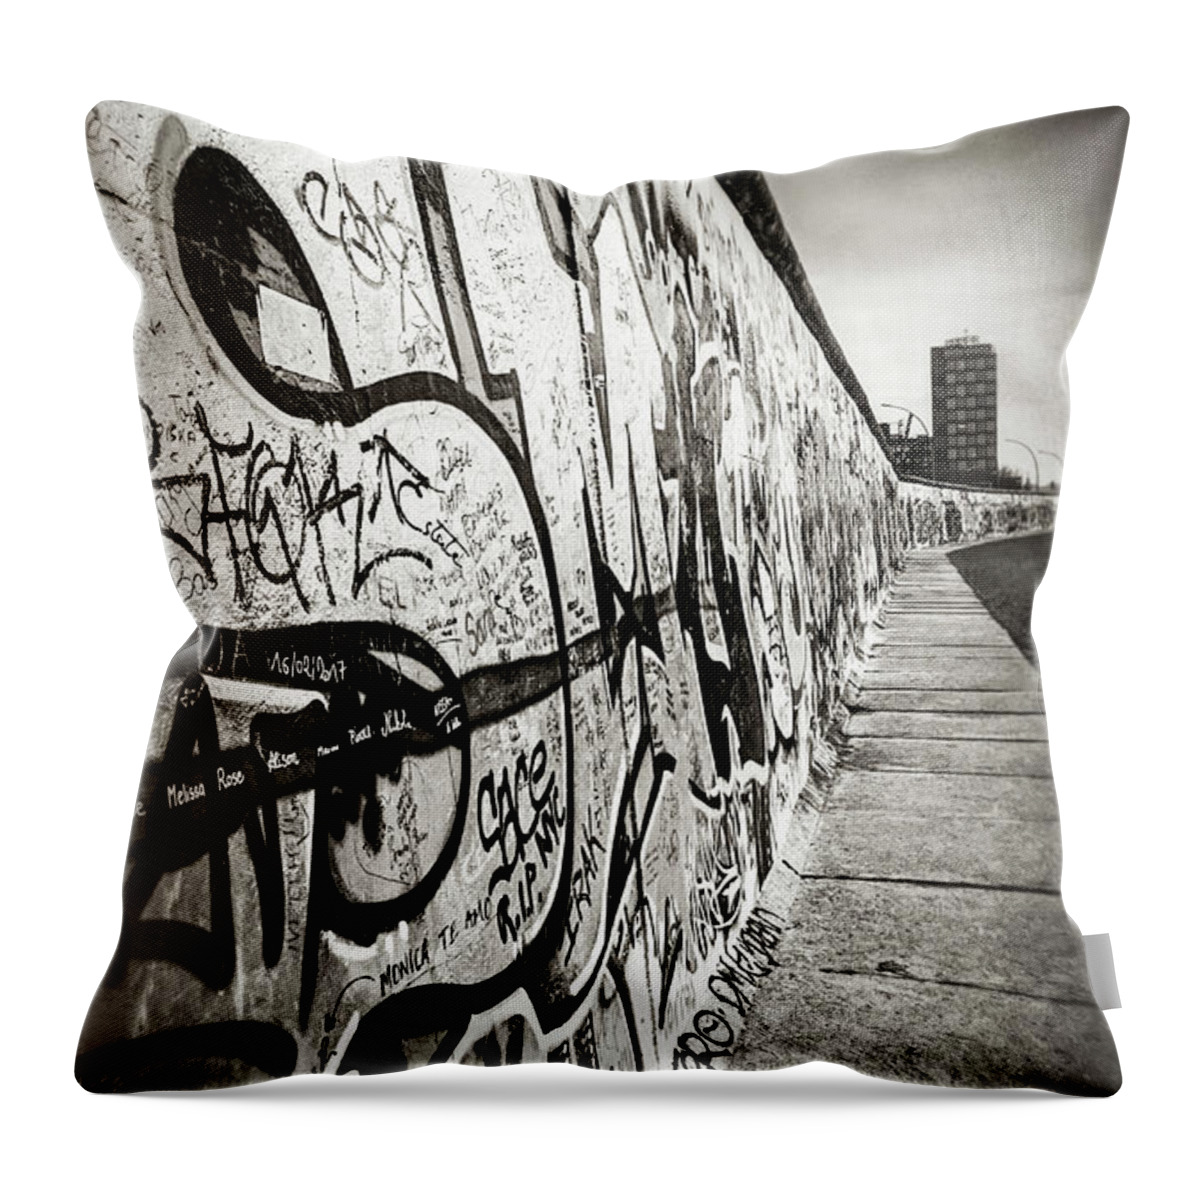 Berlin Throw Pillow featuring the photograph Berlin Wall Germany Vintage by Carol Japp